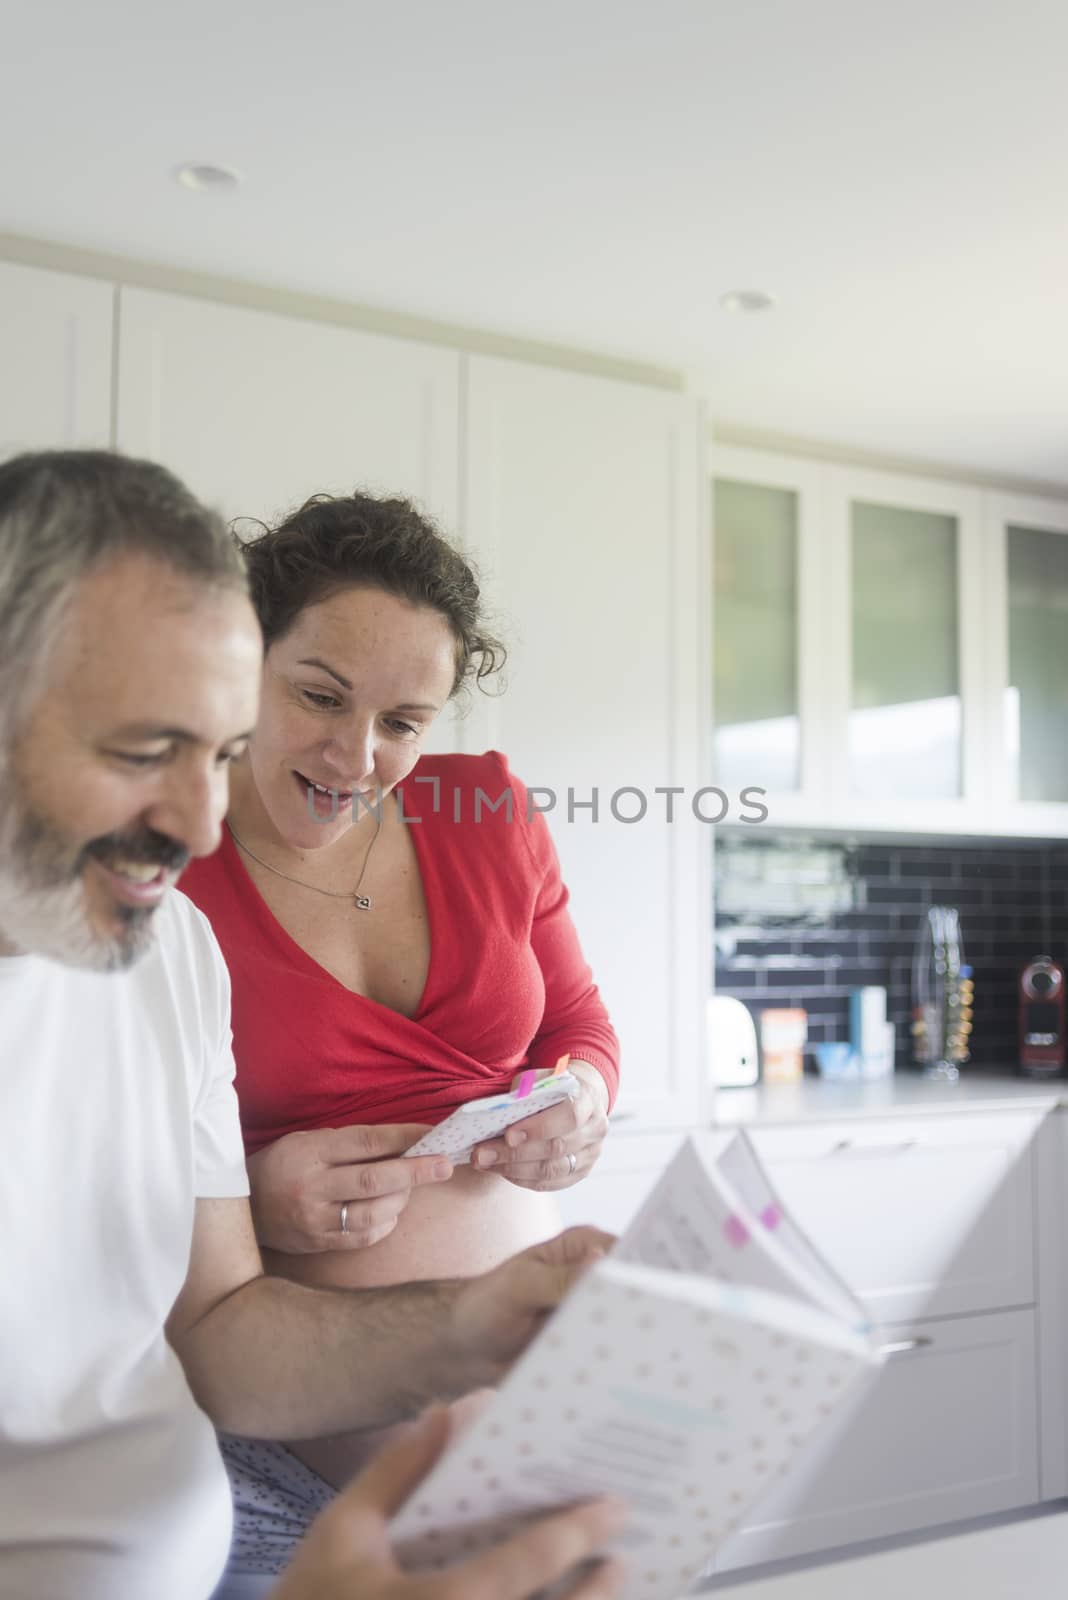 Smiling couple consulting a book at the kitchen.